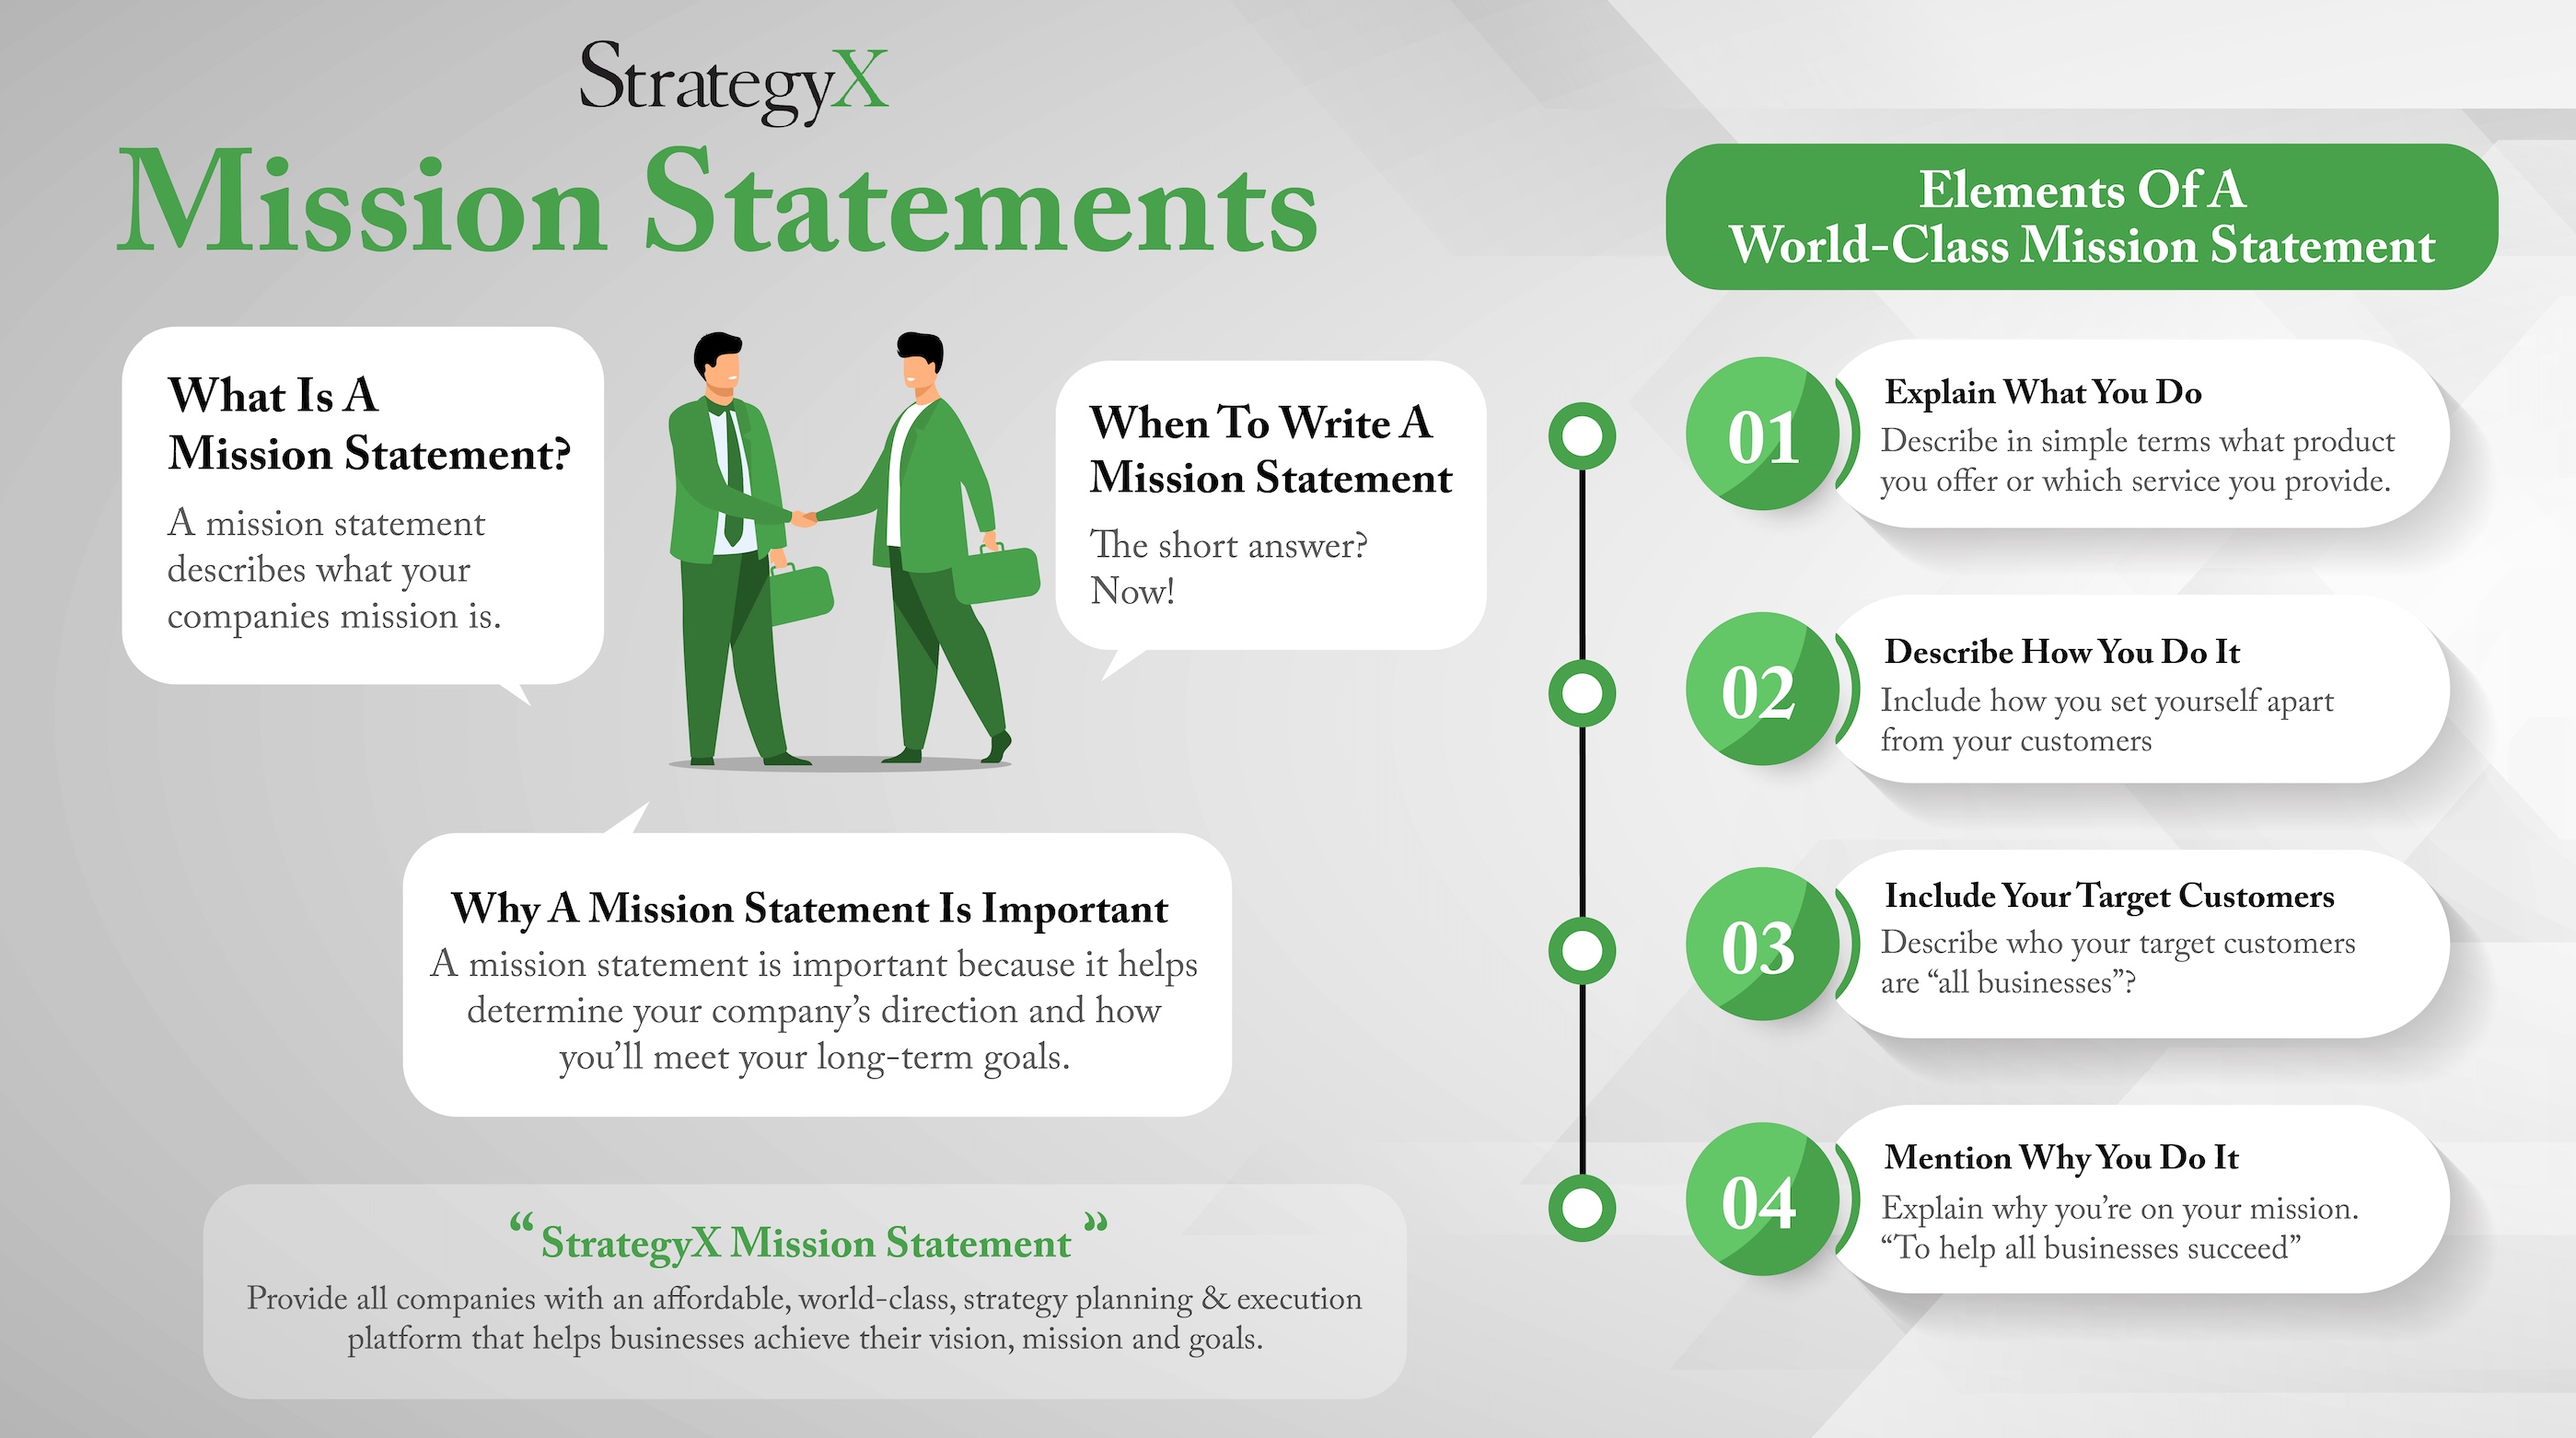 Creating  World-Class Mission Statements